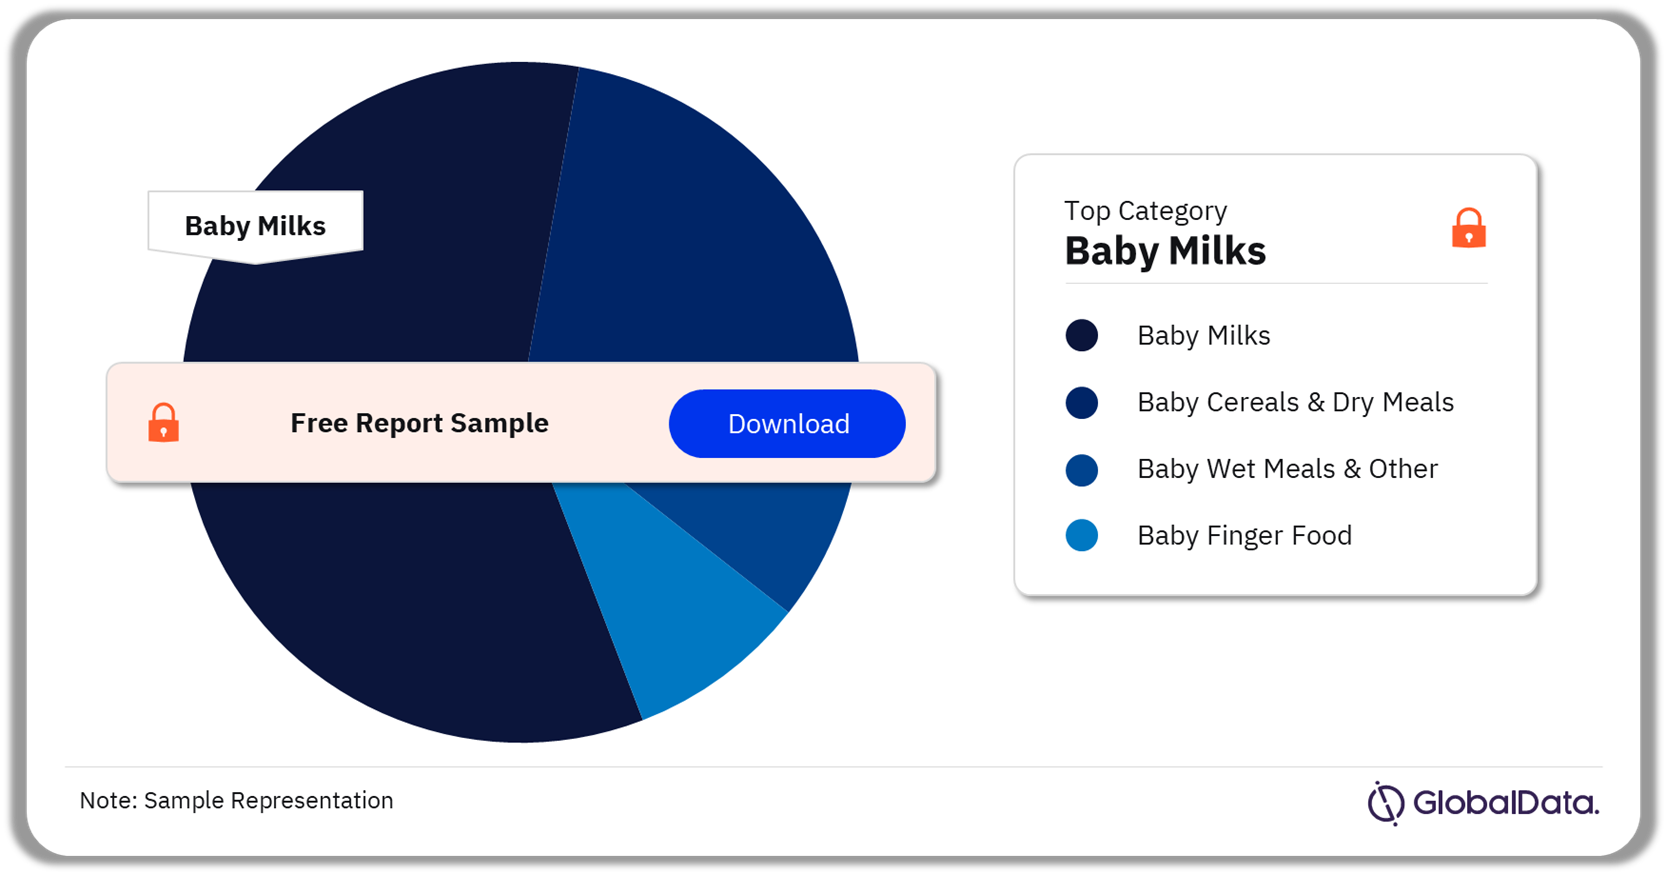 Baby milk was the leading Peruvian baby food category in 2021